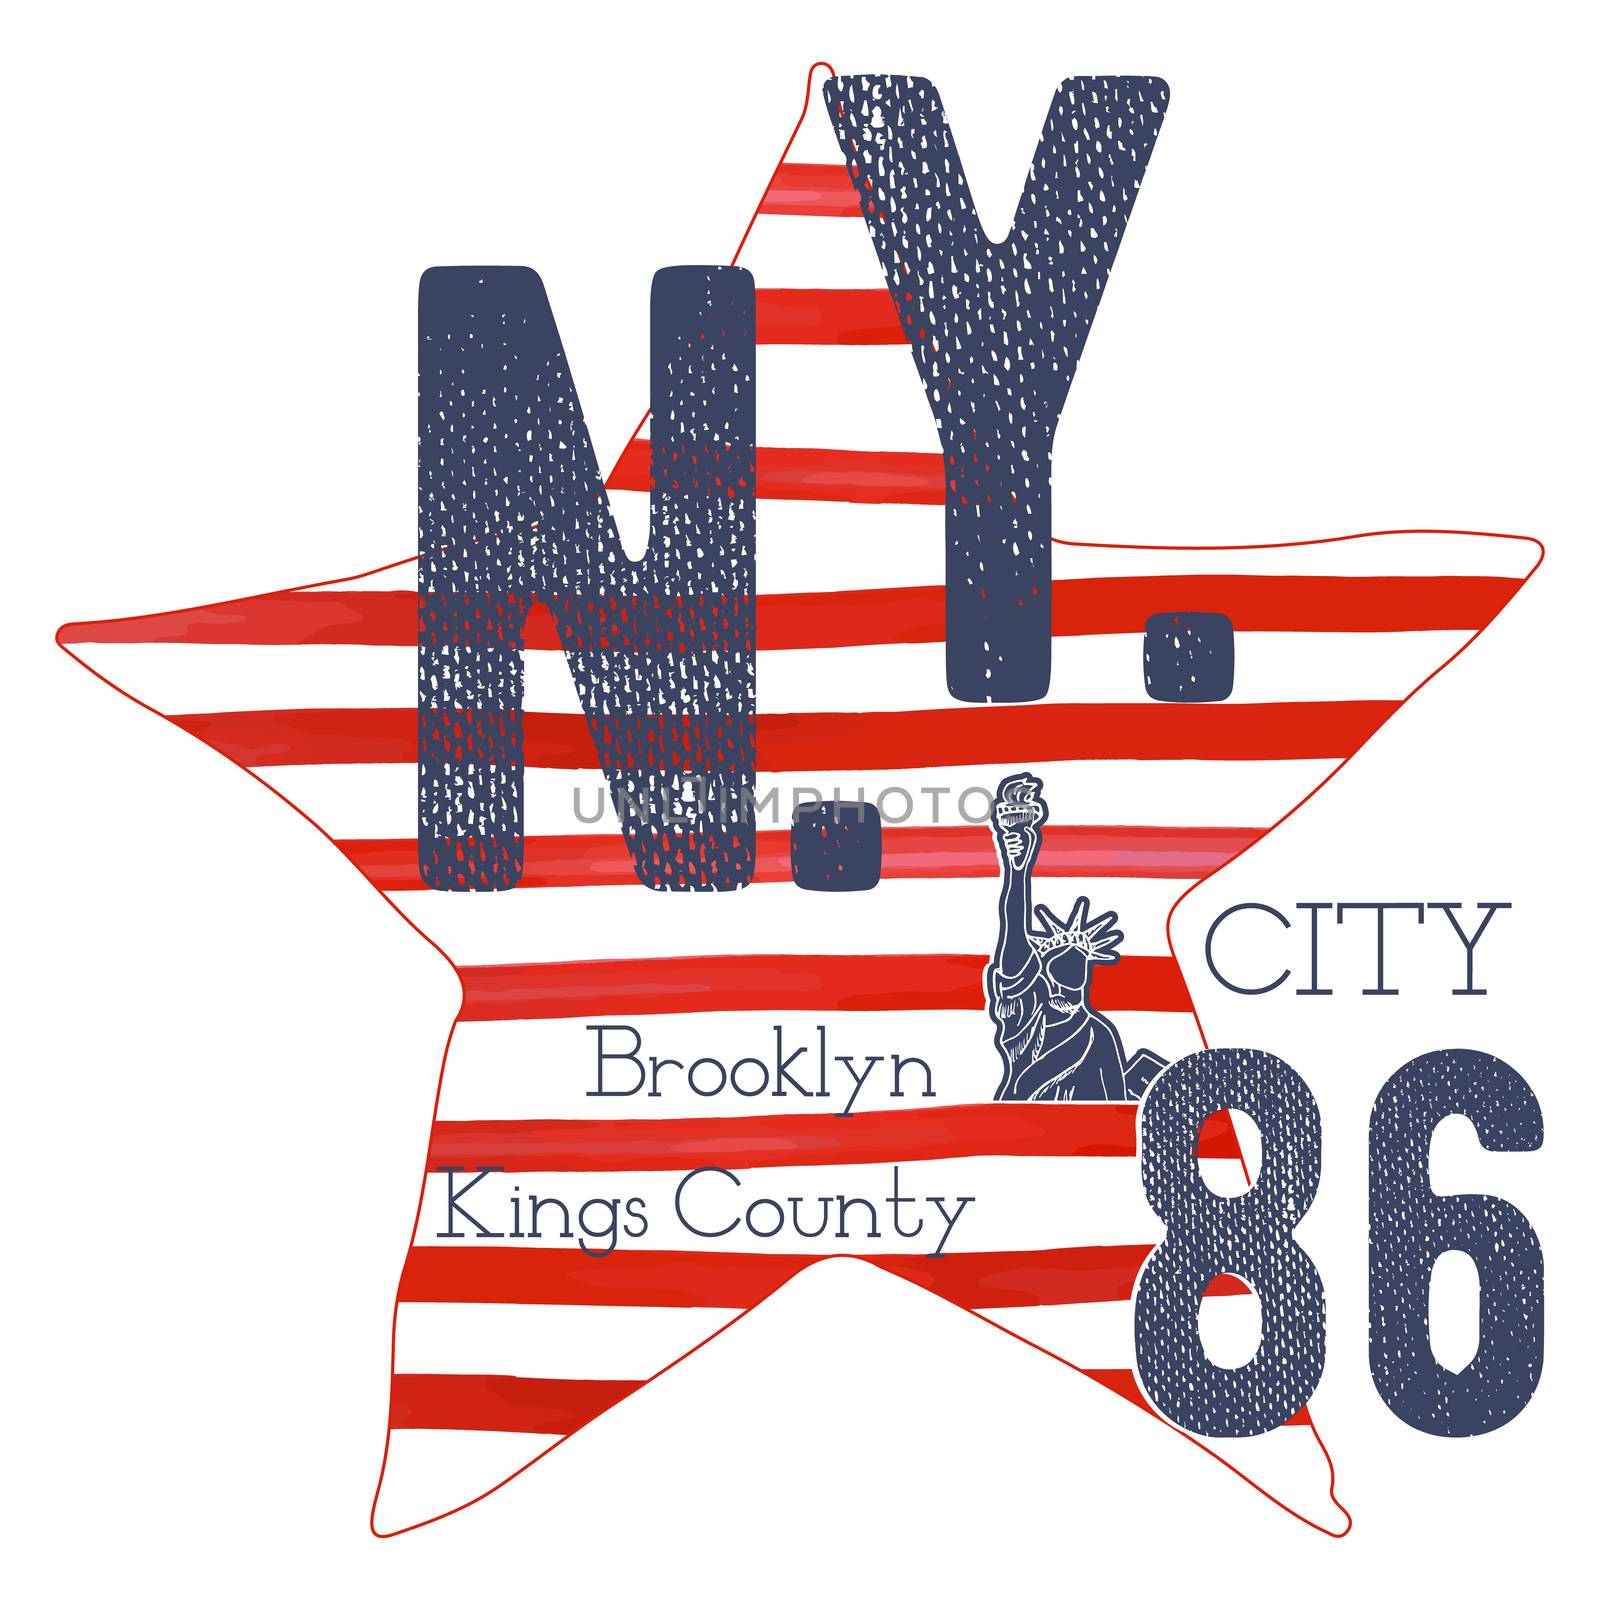 T-shirt typography design, NYC printing graphics, typographic vector illustration, New York graphic design for label or t-shirt print, Badge, Applique.